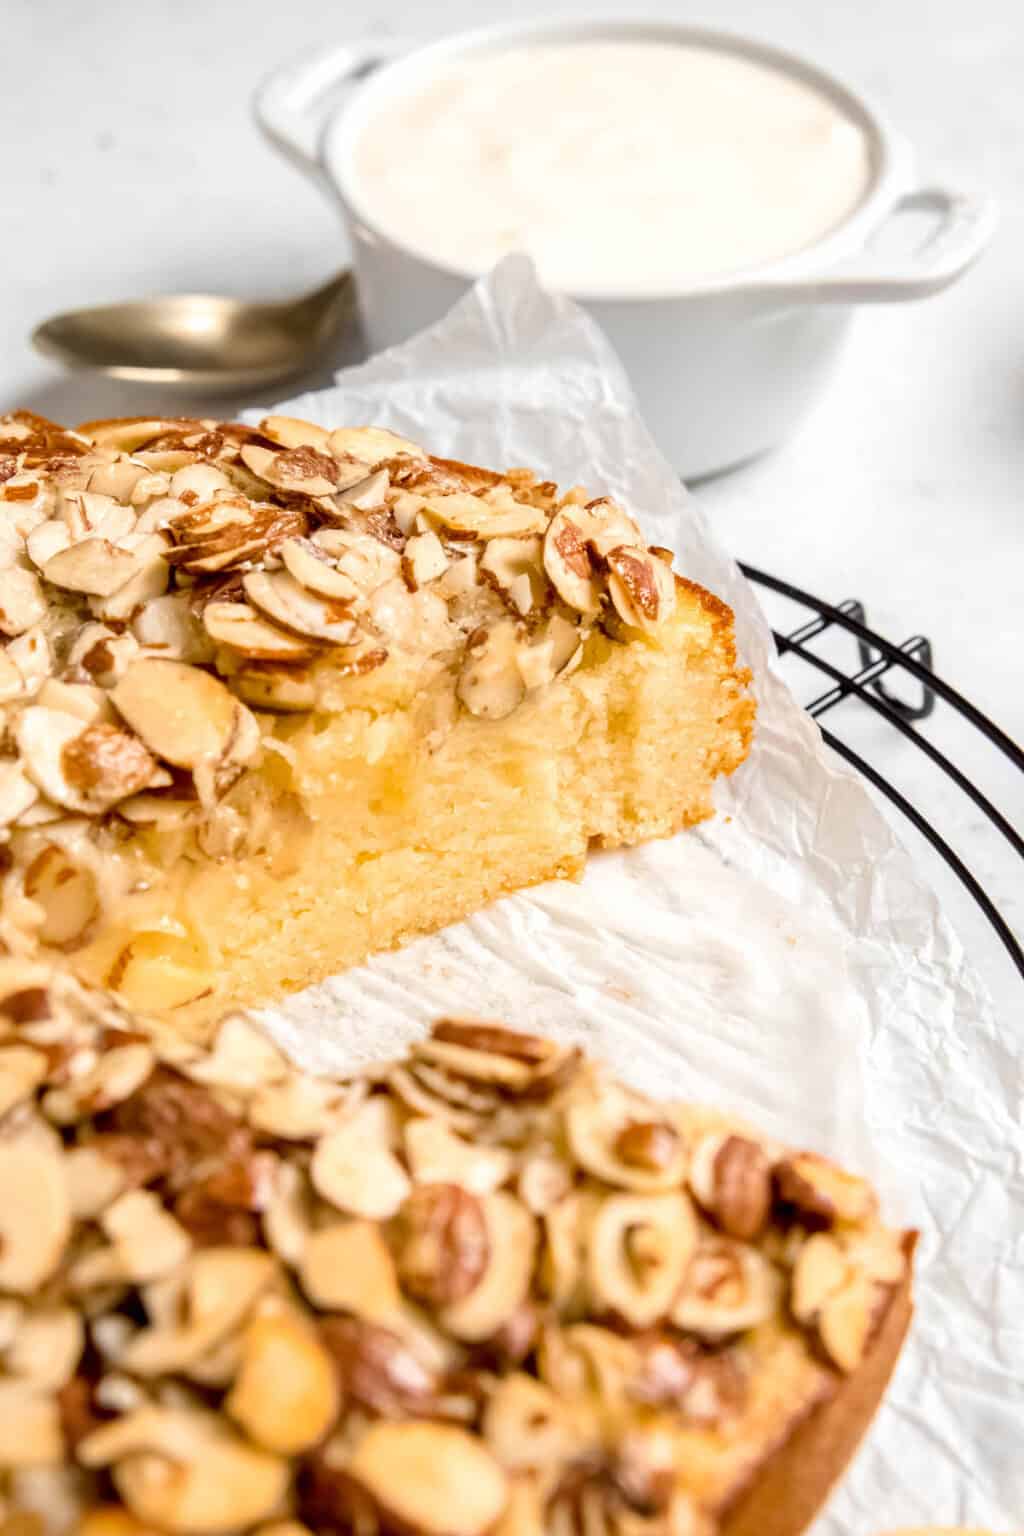 Italian Lemon Cake With Almonds & Ricotta | Confessions of a Grocery Addict